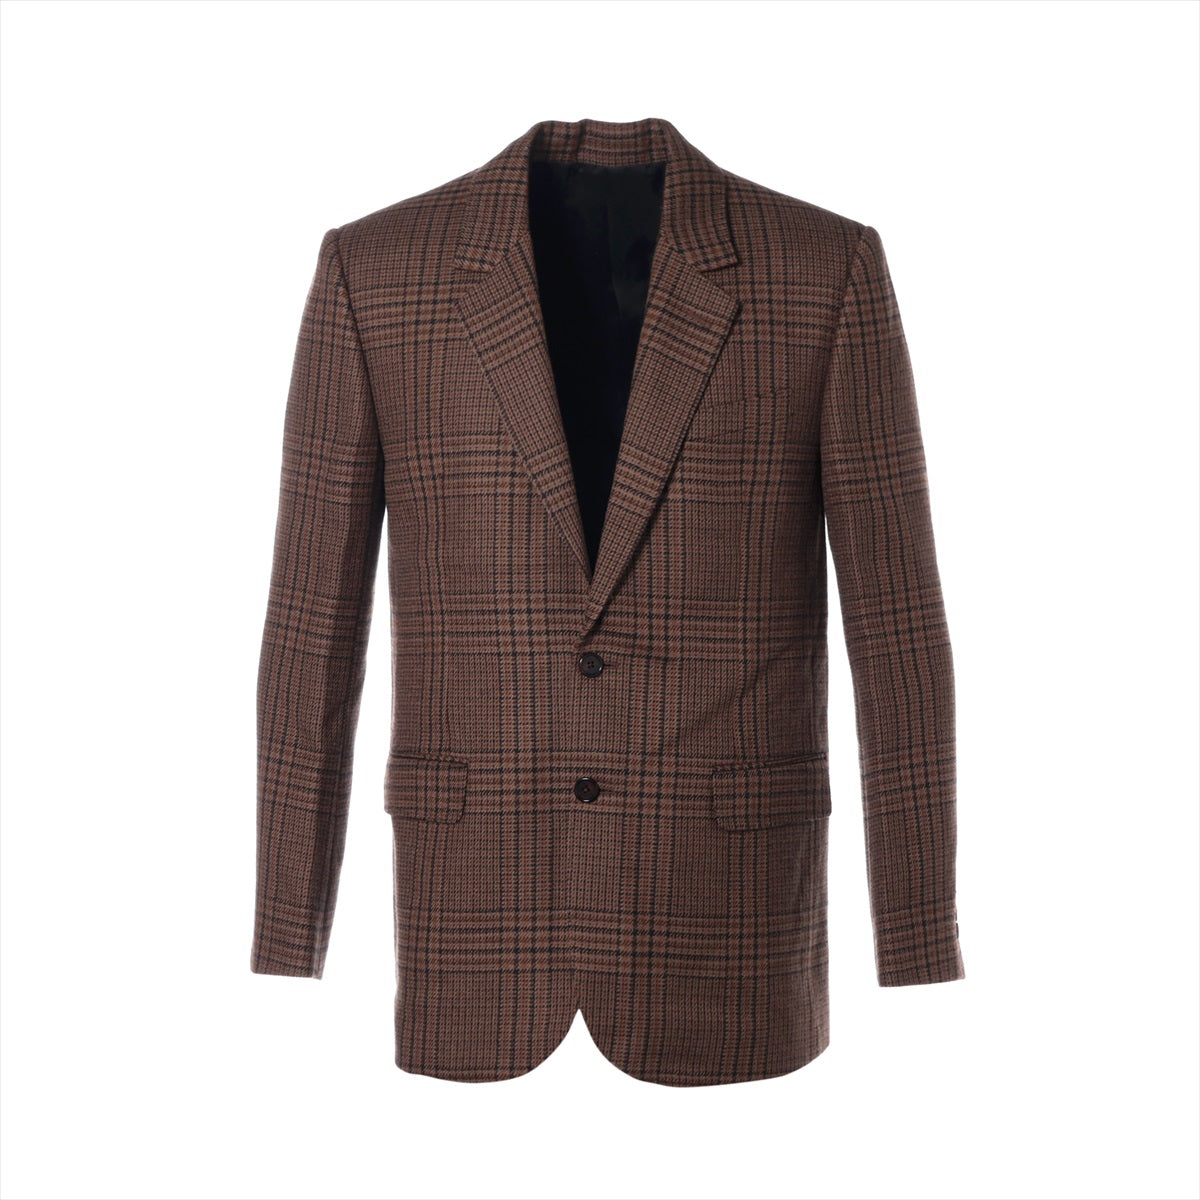 Celine wool x rayon Tailored Jacket 38 Men's Brown  2V49F9470 Has spare buttons